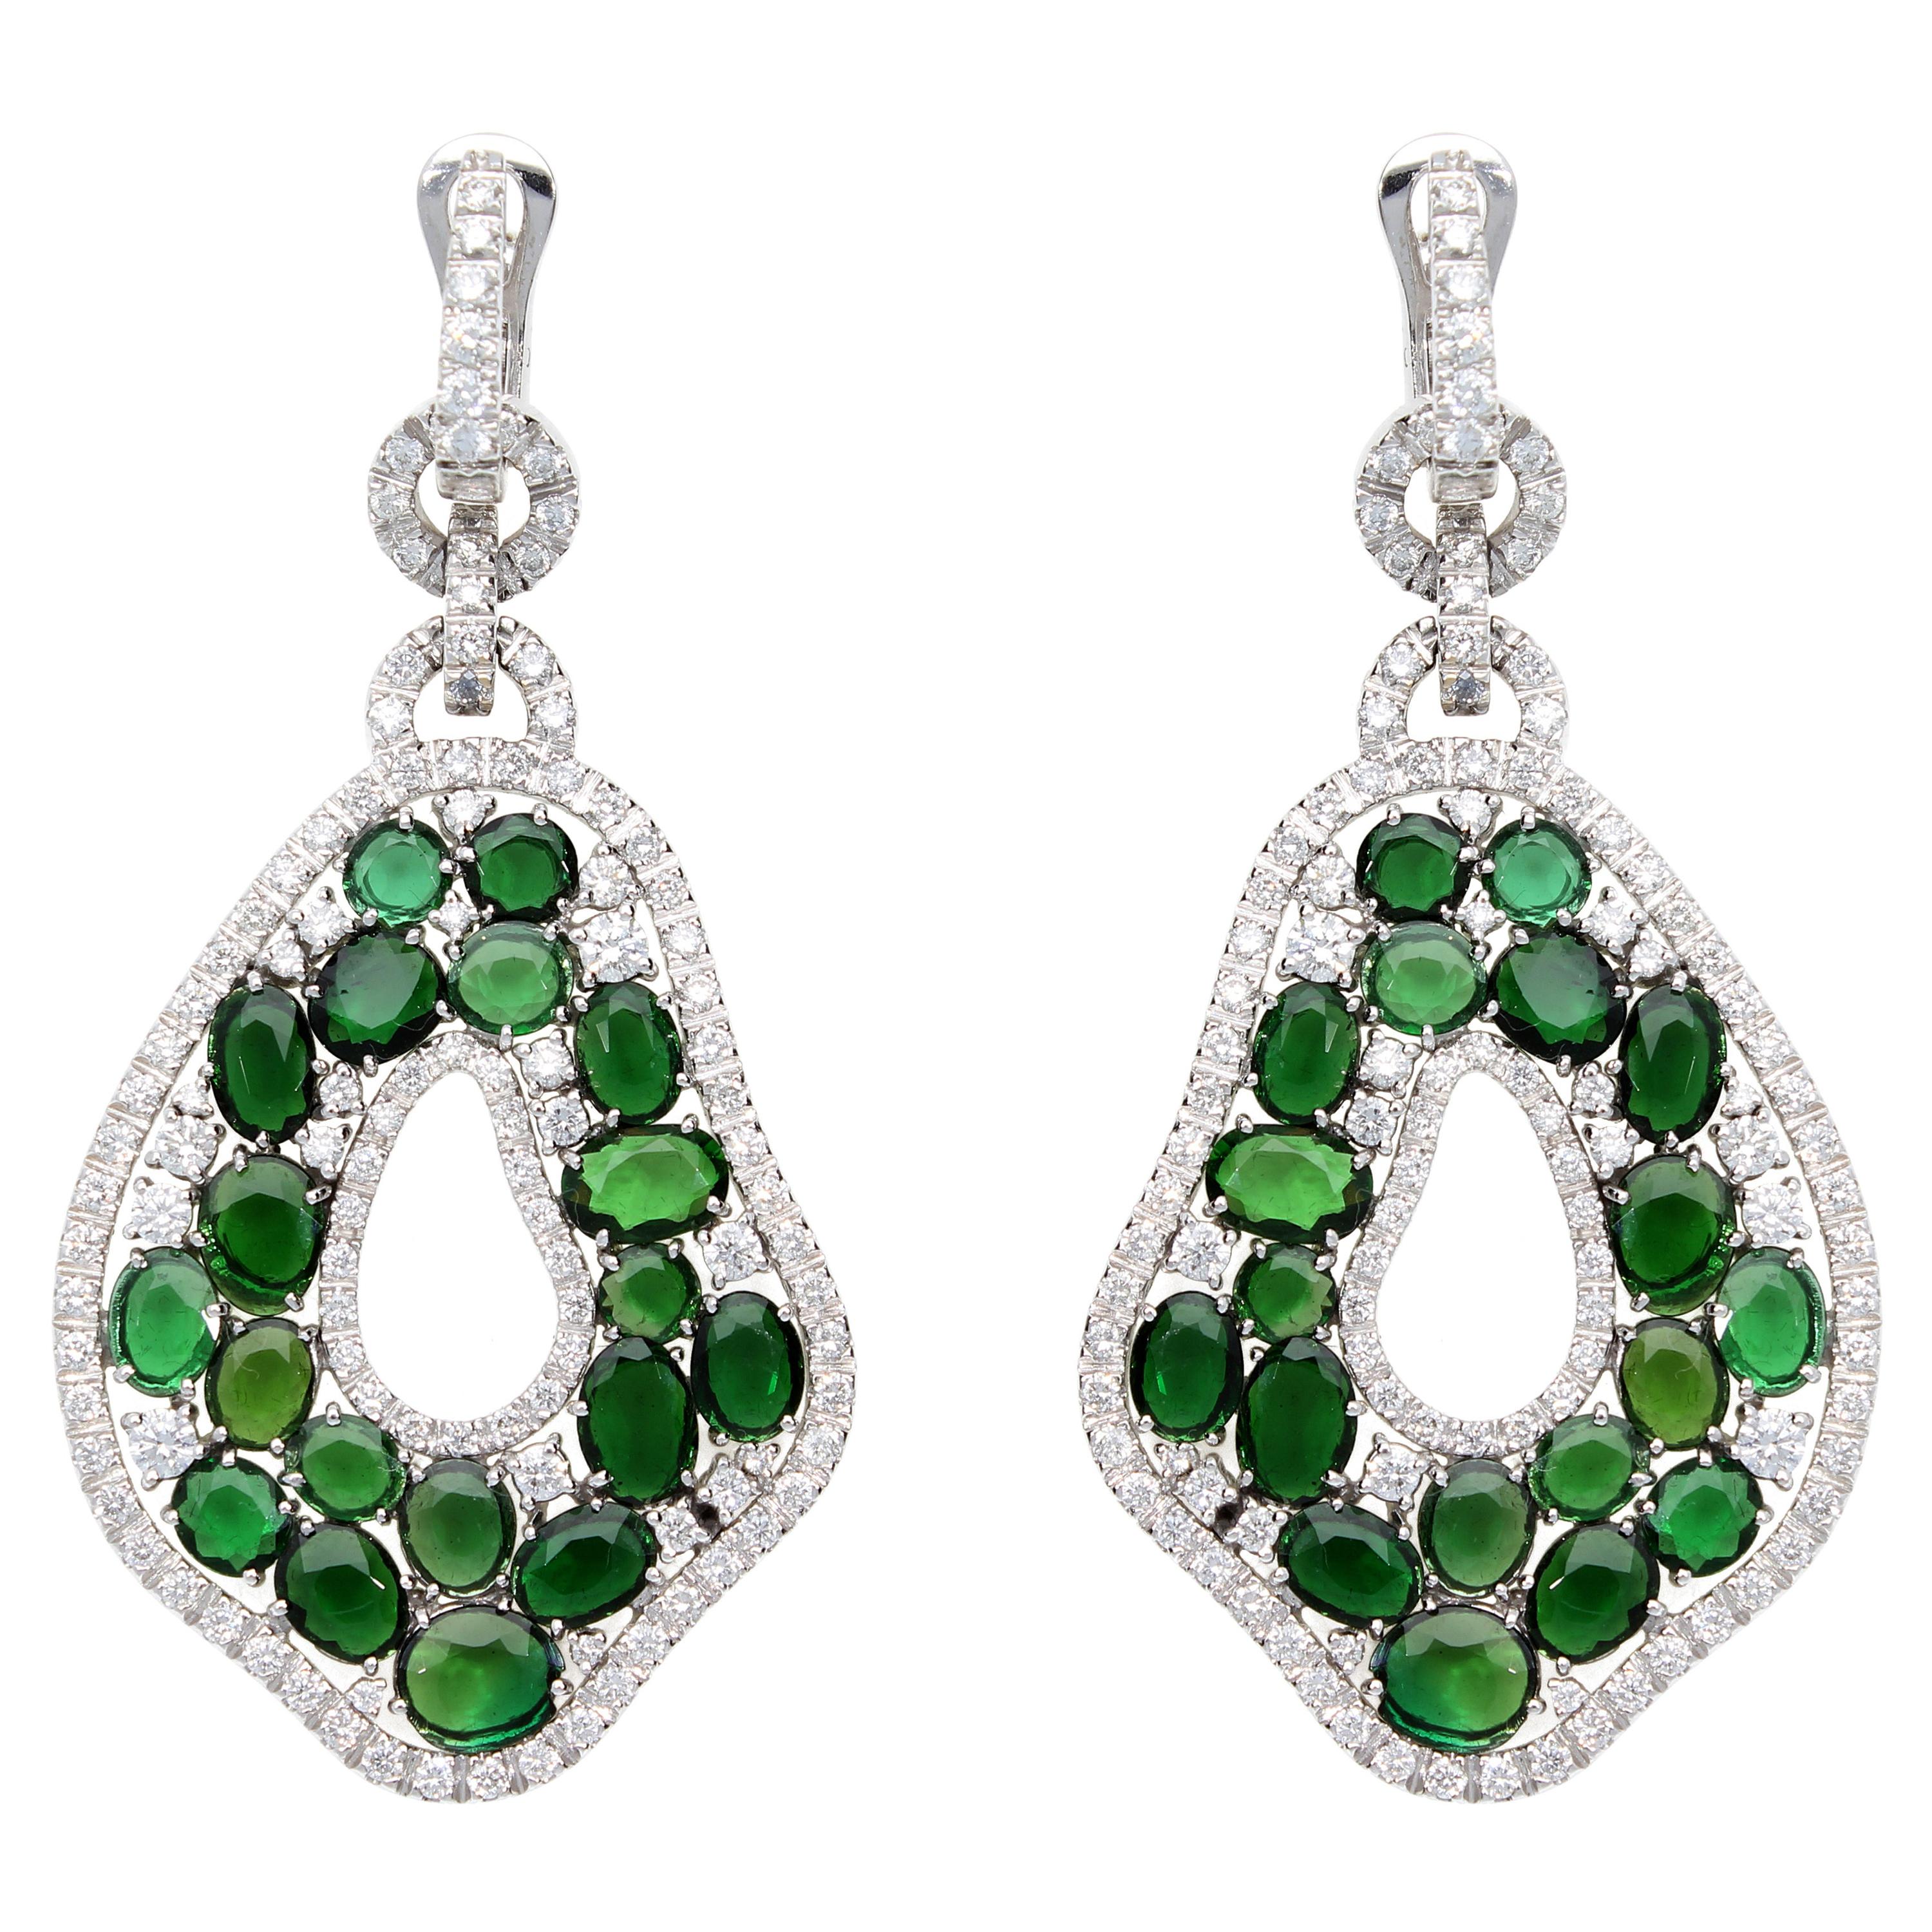 Pendant Earrings with Diamonds and Green Tourmalines, in 18 Kt White Gold